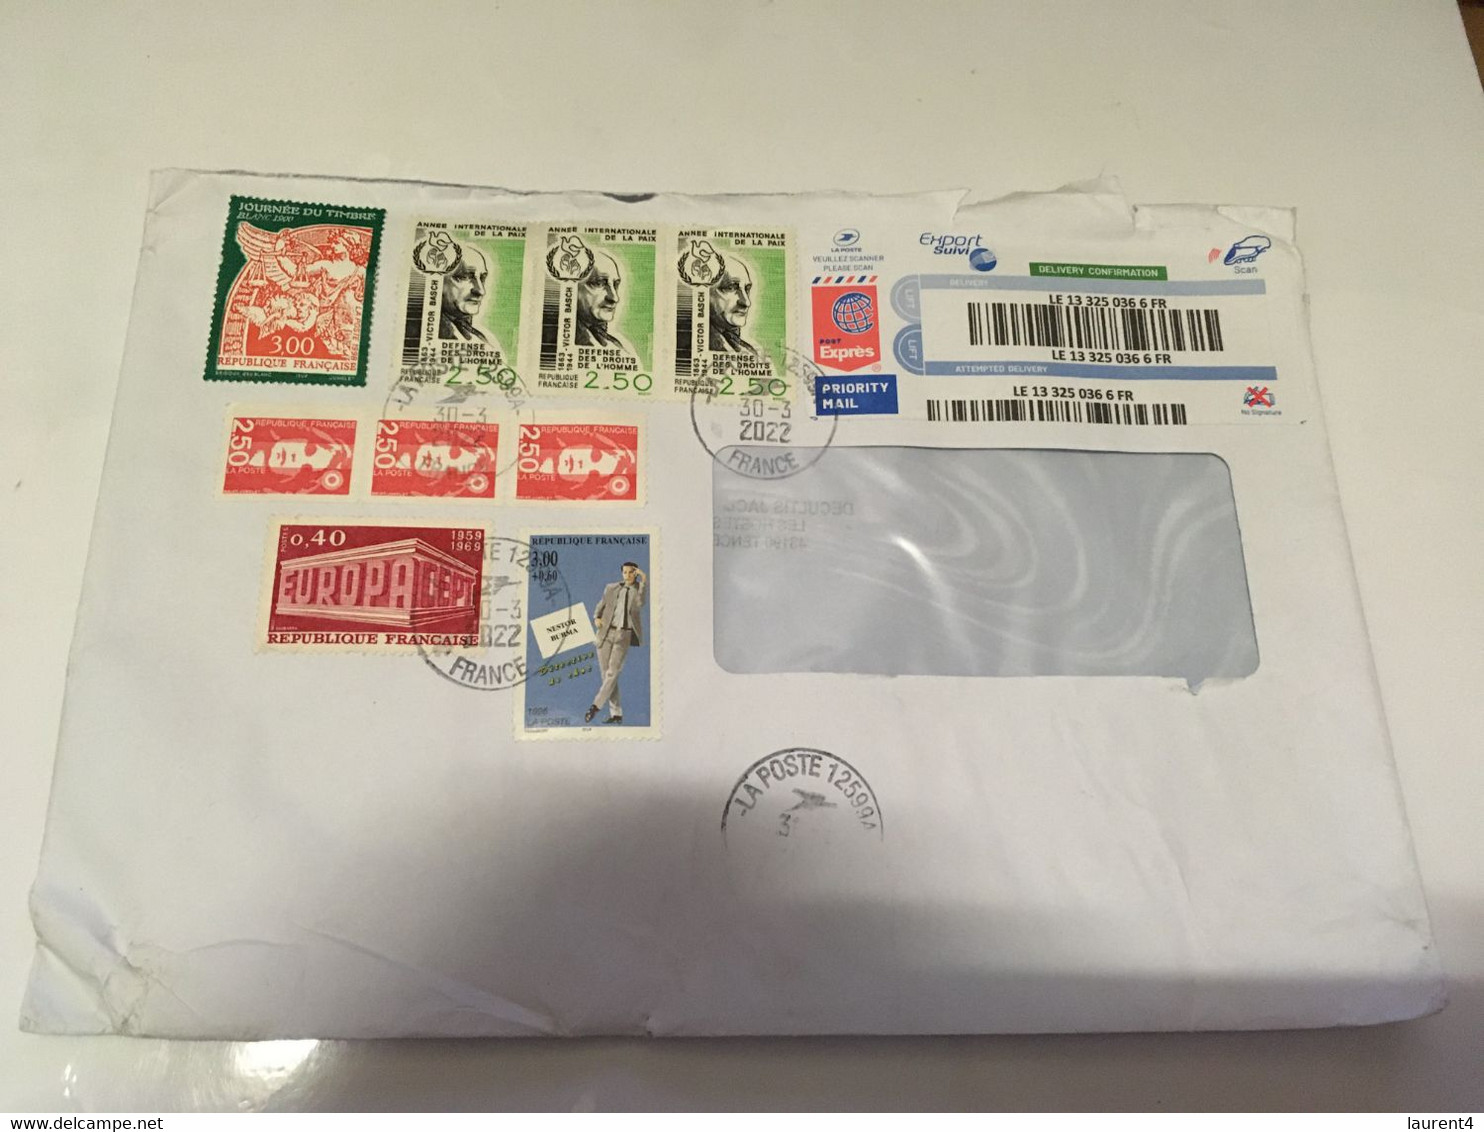 (3 H 25) Large France Registered Letter Posted To Australia (during COVID-19 Pandemic Crisis) With Many Stamps - Covers & Documents